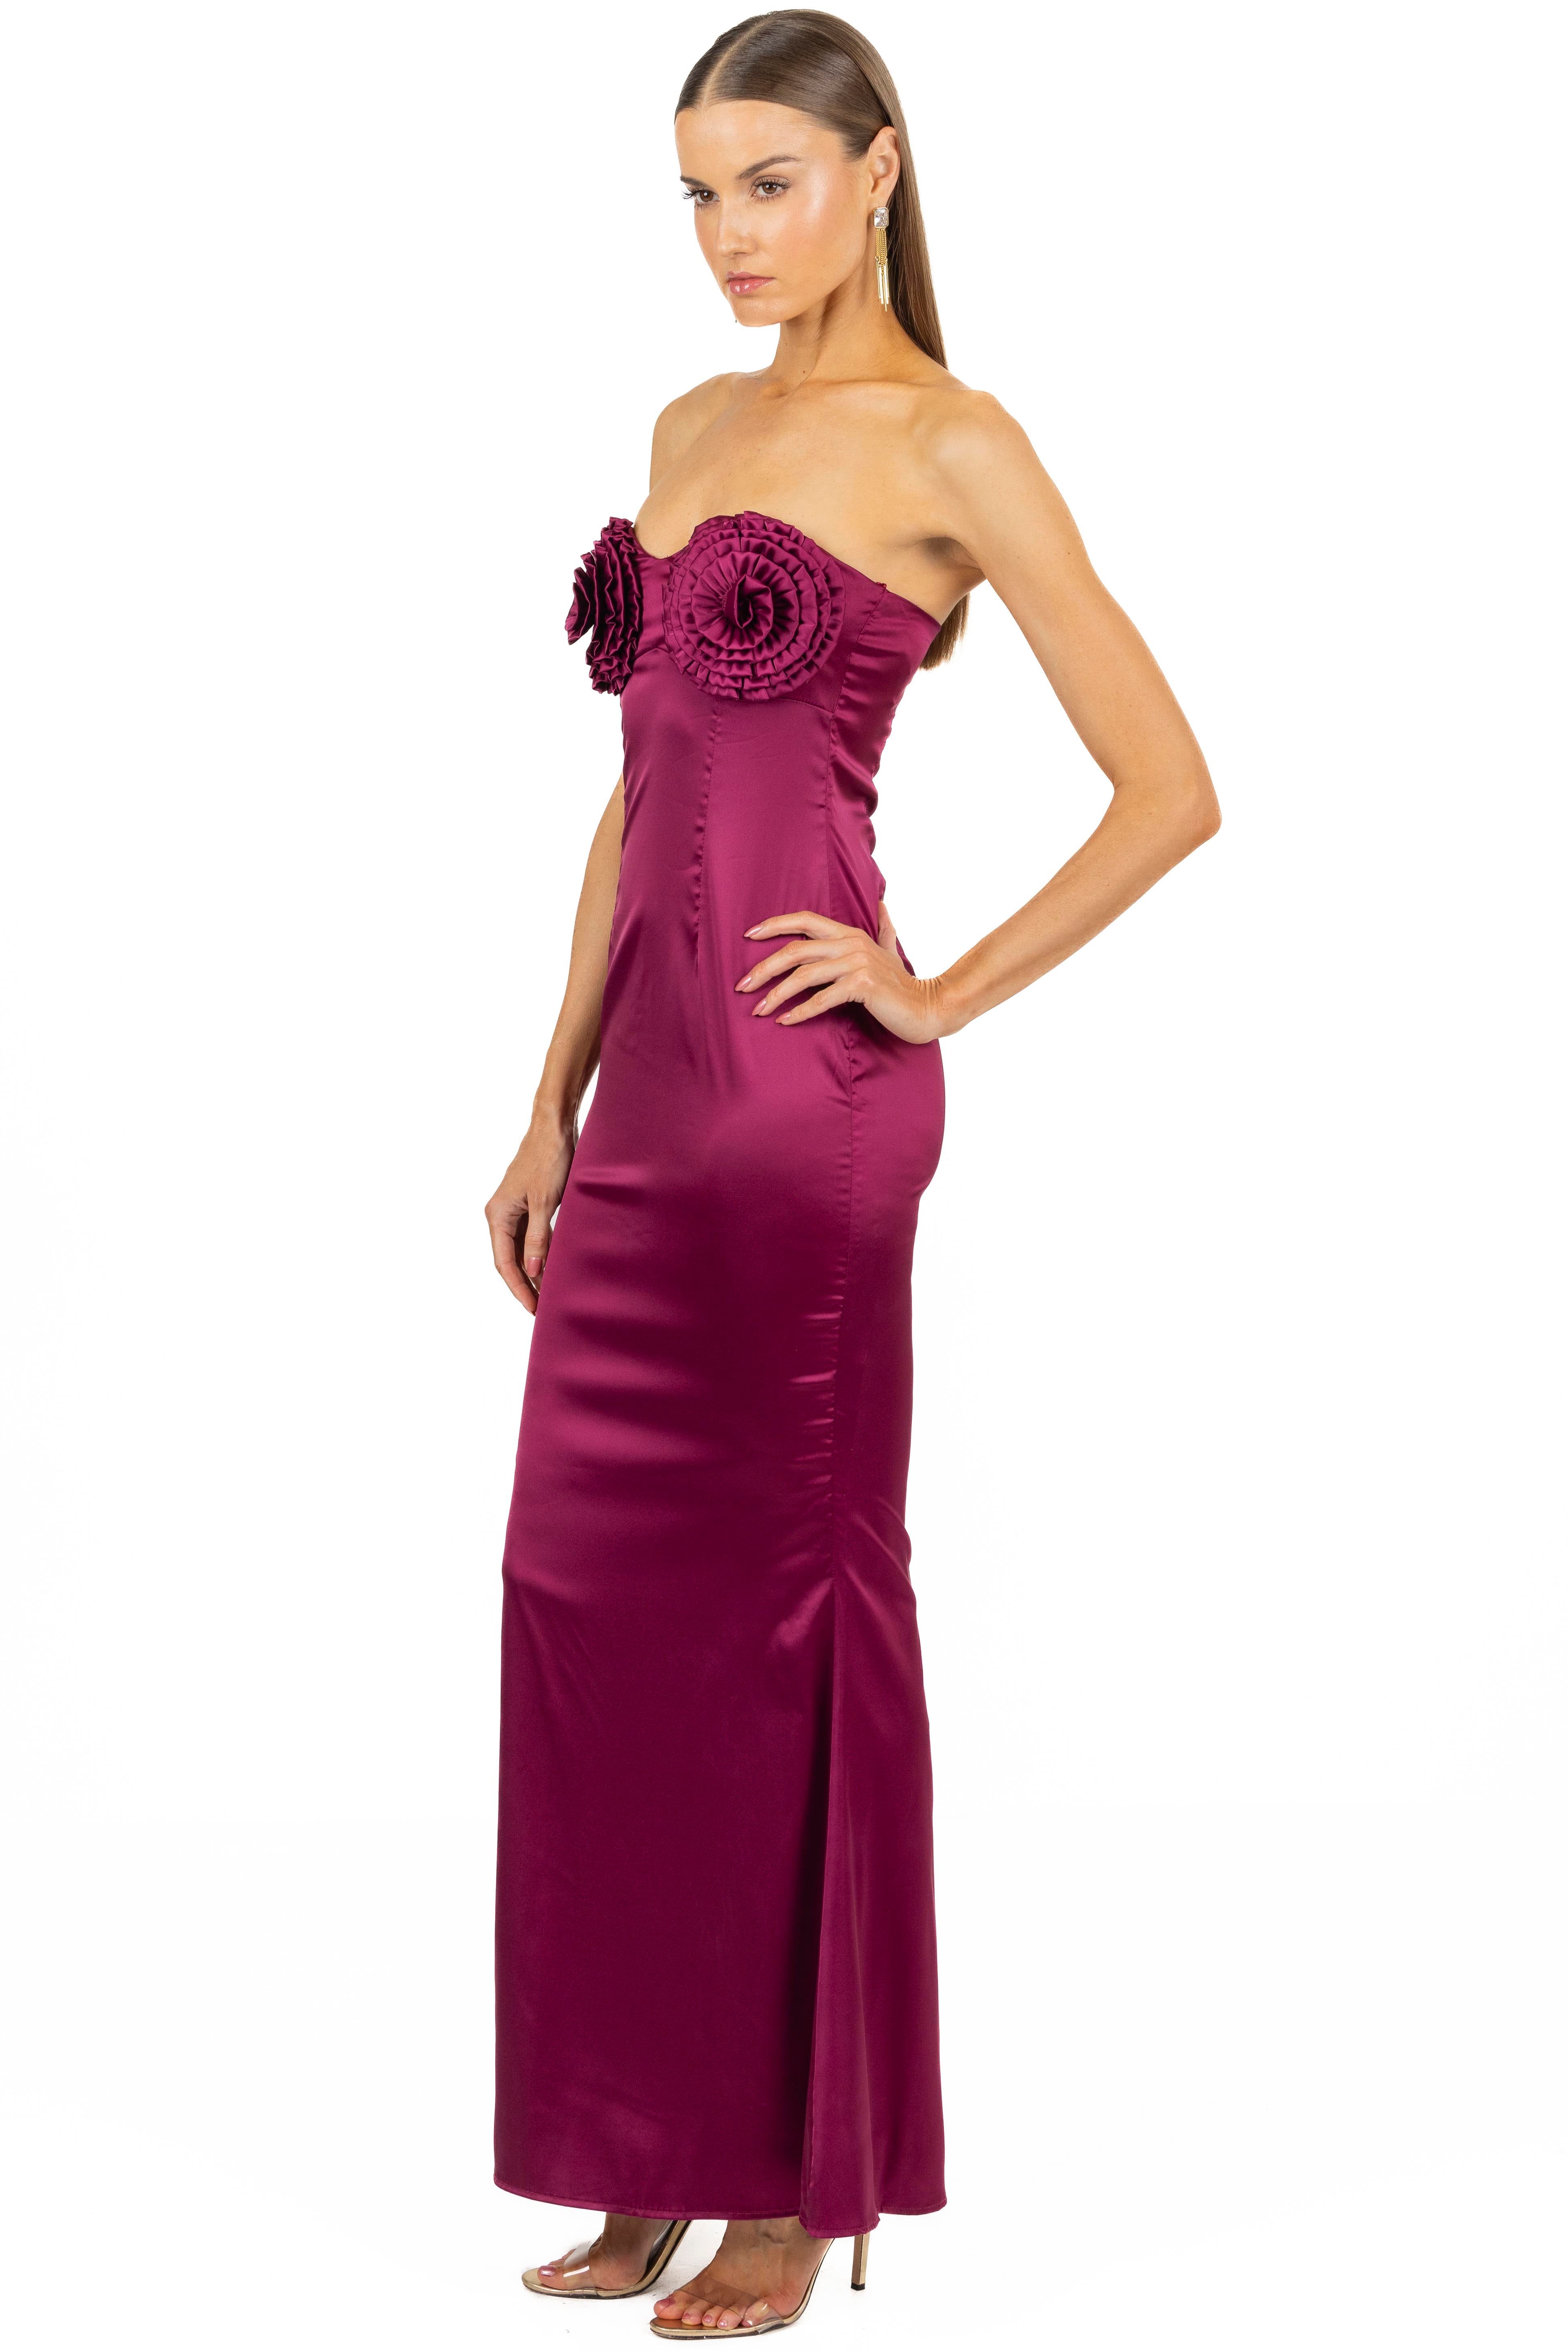 ROSELINI GOWN